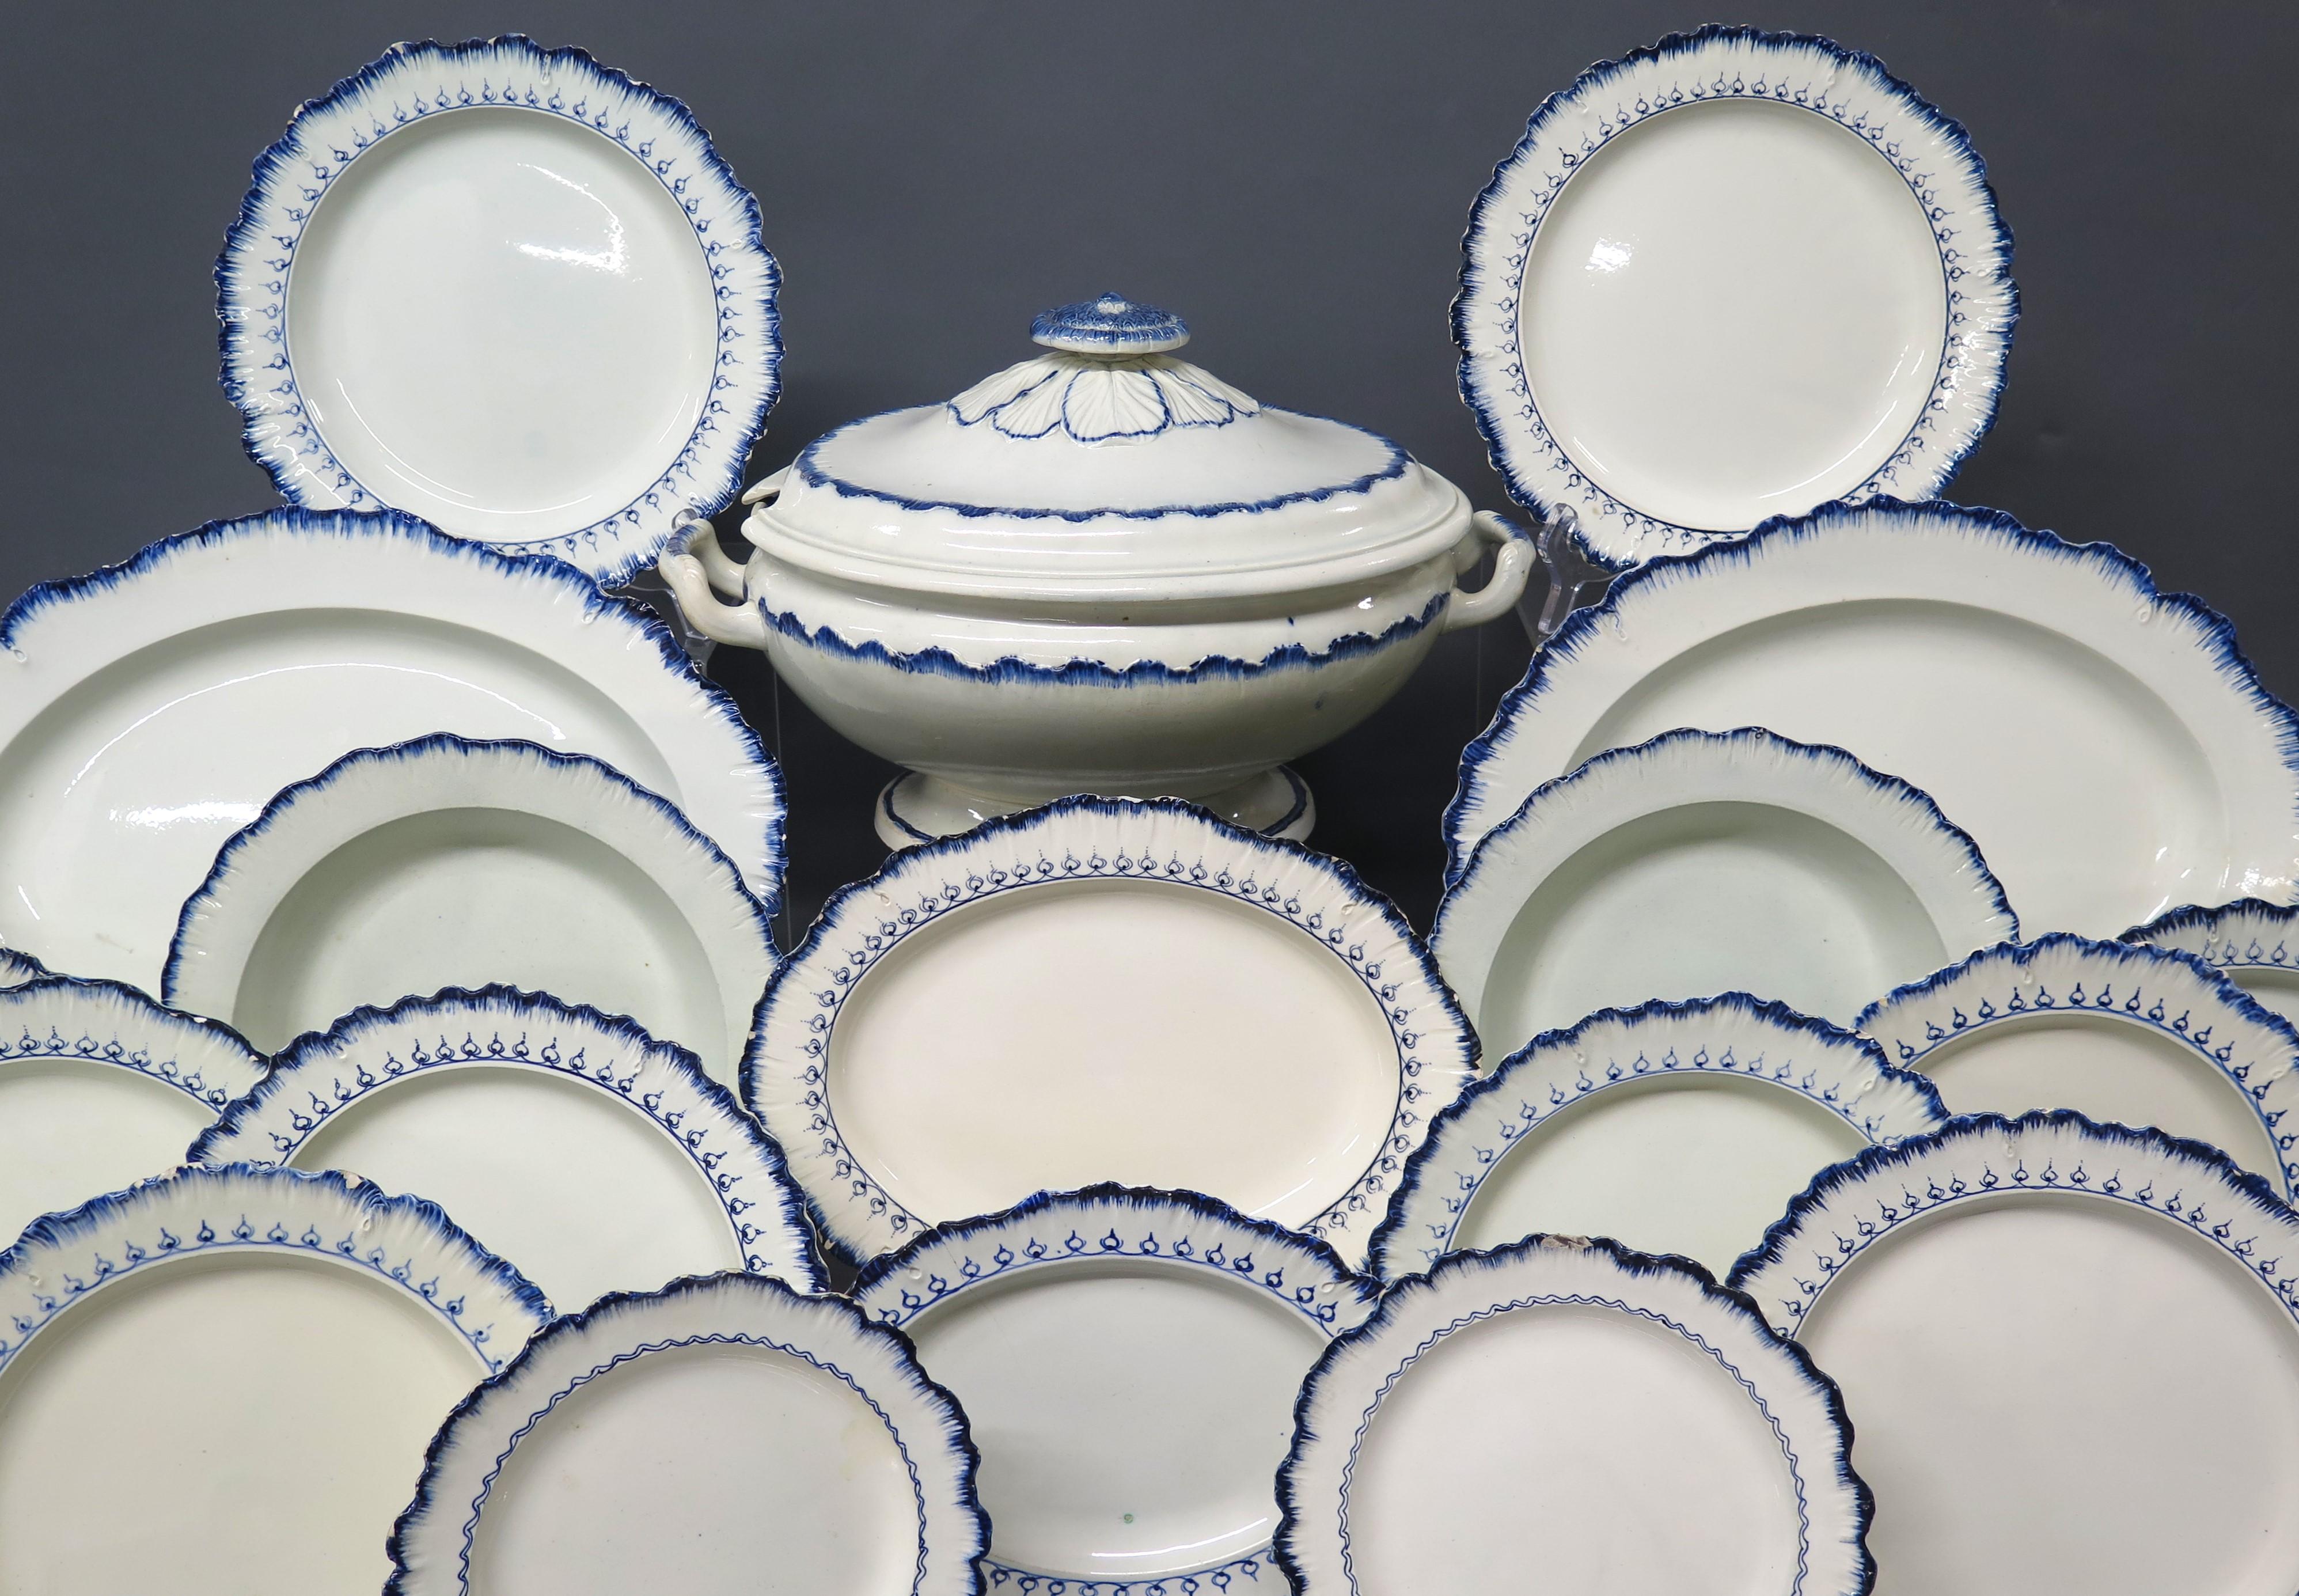 a handsome 25 piece group of feather edge creamware / pearlware with impressed Wedgwood mark, group includes a tureen with lid, several oval platters, and several sizes of plates. England, late 18th / 19th century

MEASUREMENTS:

9.75